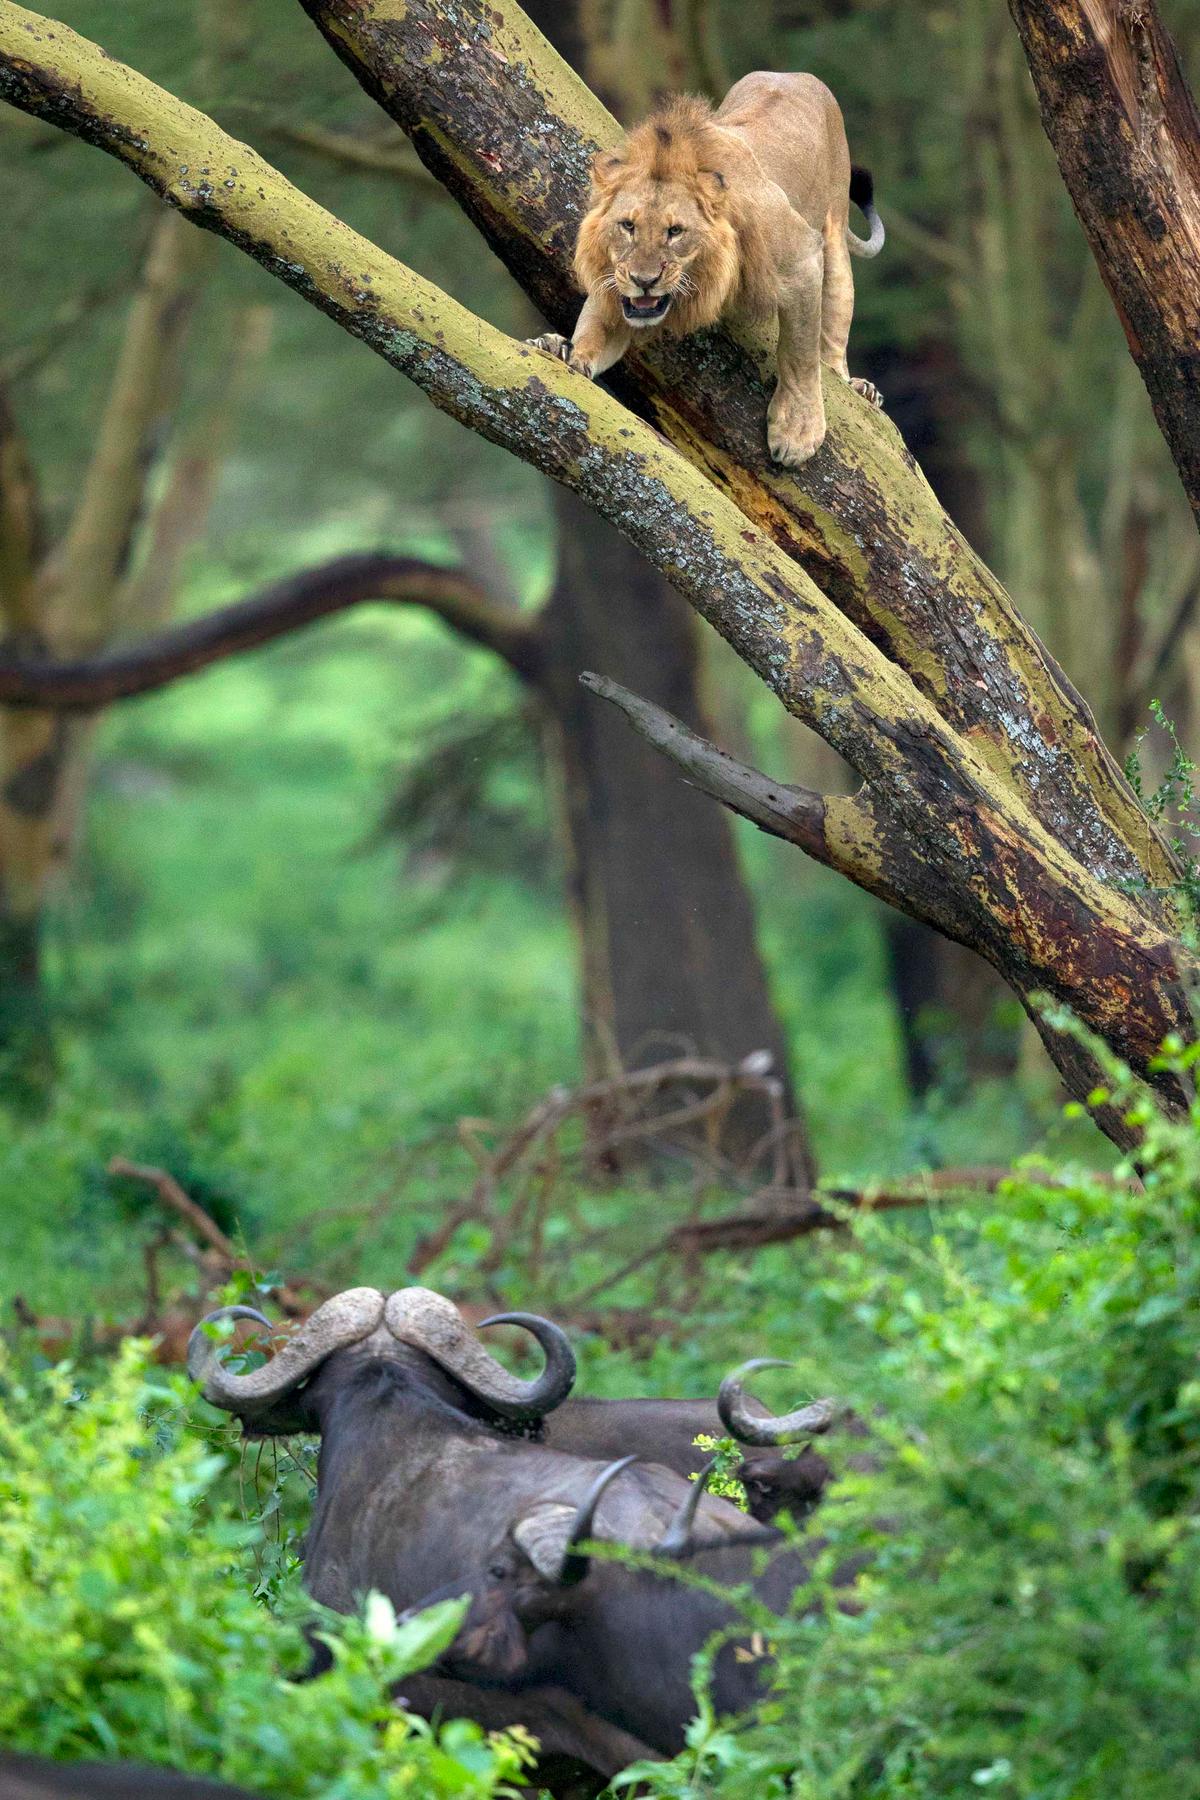 A scaredy-cat lion hides in a tree from a herd of angry cape buffaloes in Kenya. (Courtesy of Caters News)